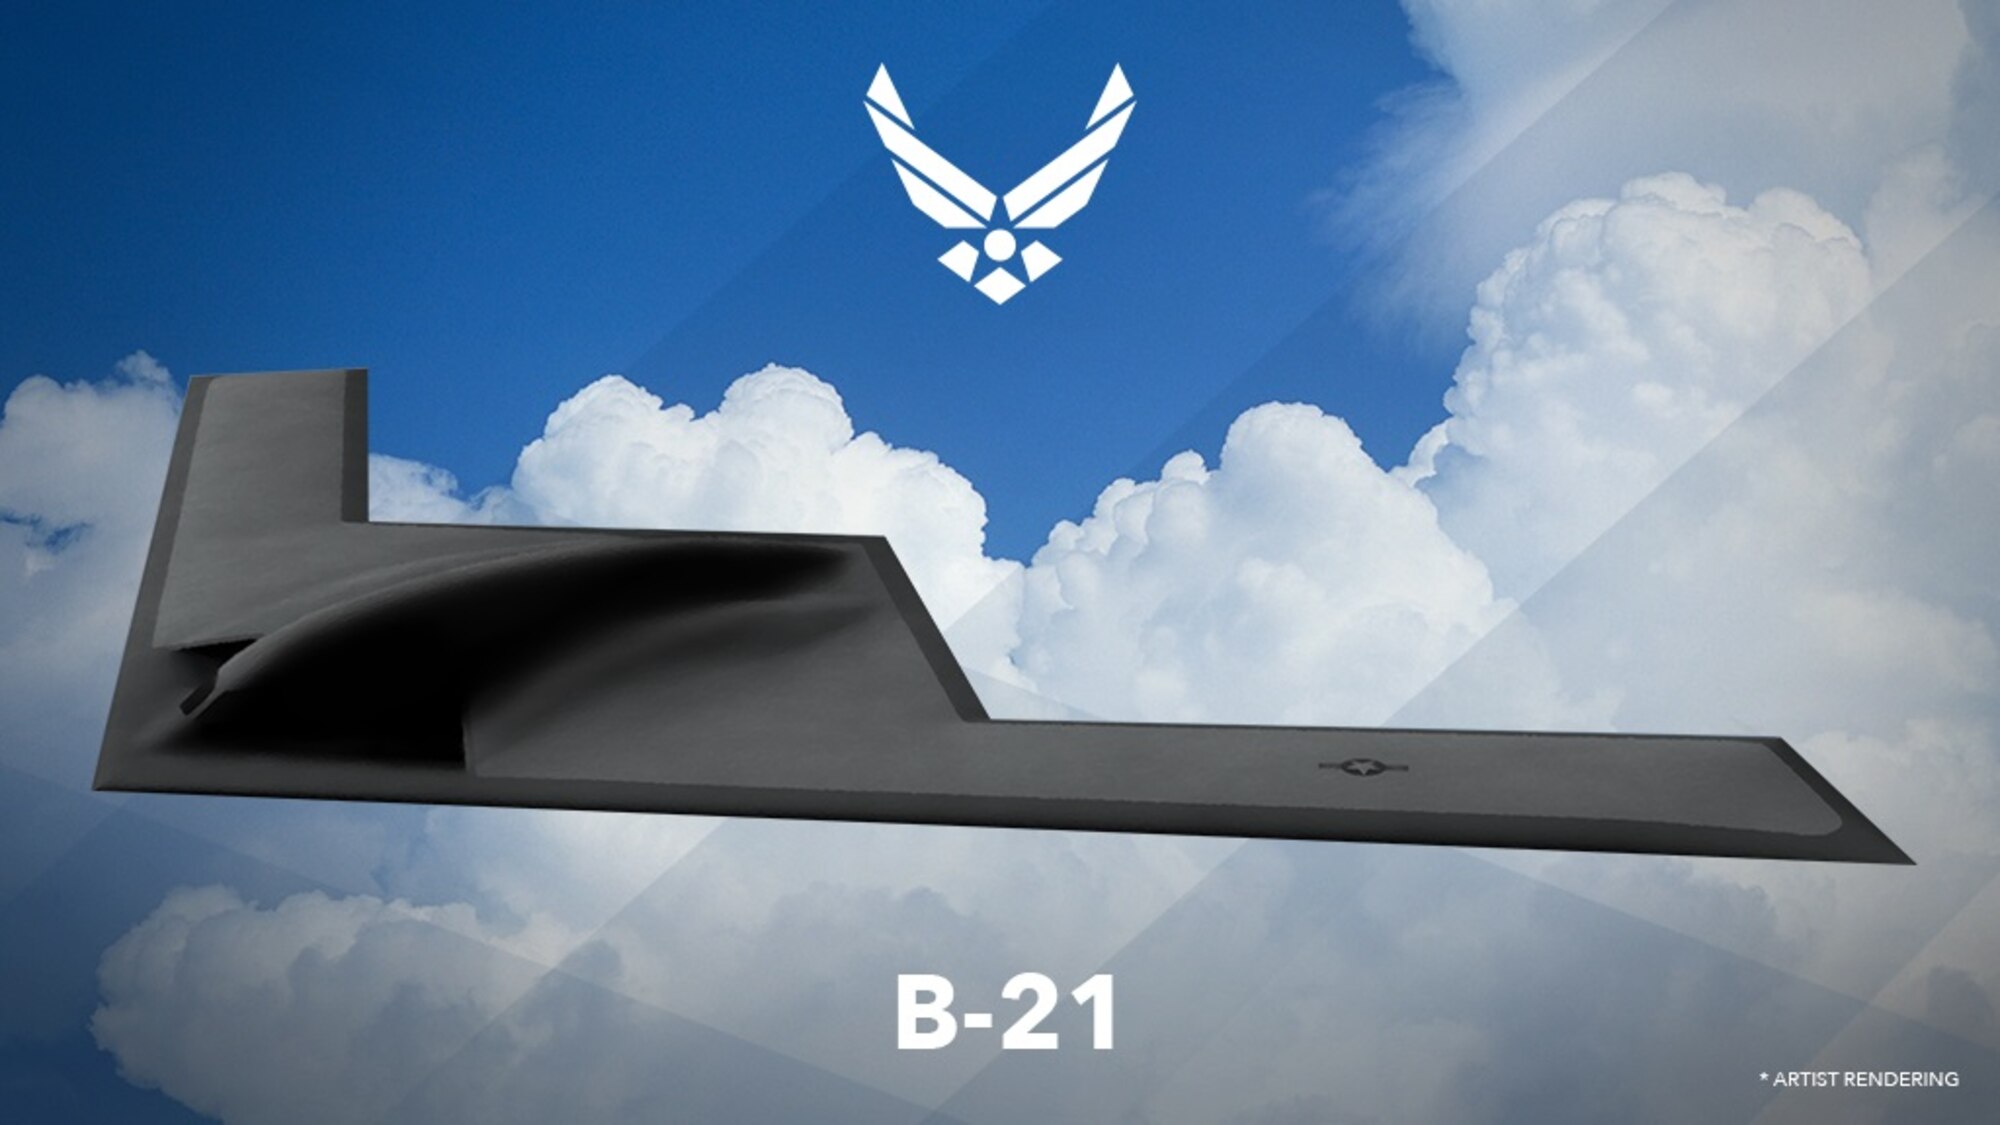 An artist's rendering of the B-21 Long-Range Strike Bomber. Air Force Secretary Deborah Lee James revealed the first rendering of the Long Range Strike Bomber, designated the B-21, at the Air Force Association’s Air Warfare Symposium Feb. 26, 2016, in Orlando, Fla., and announced the Air Force will be taking suggestions from Airmen to help decide the name of the bomber.
